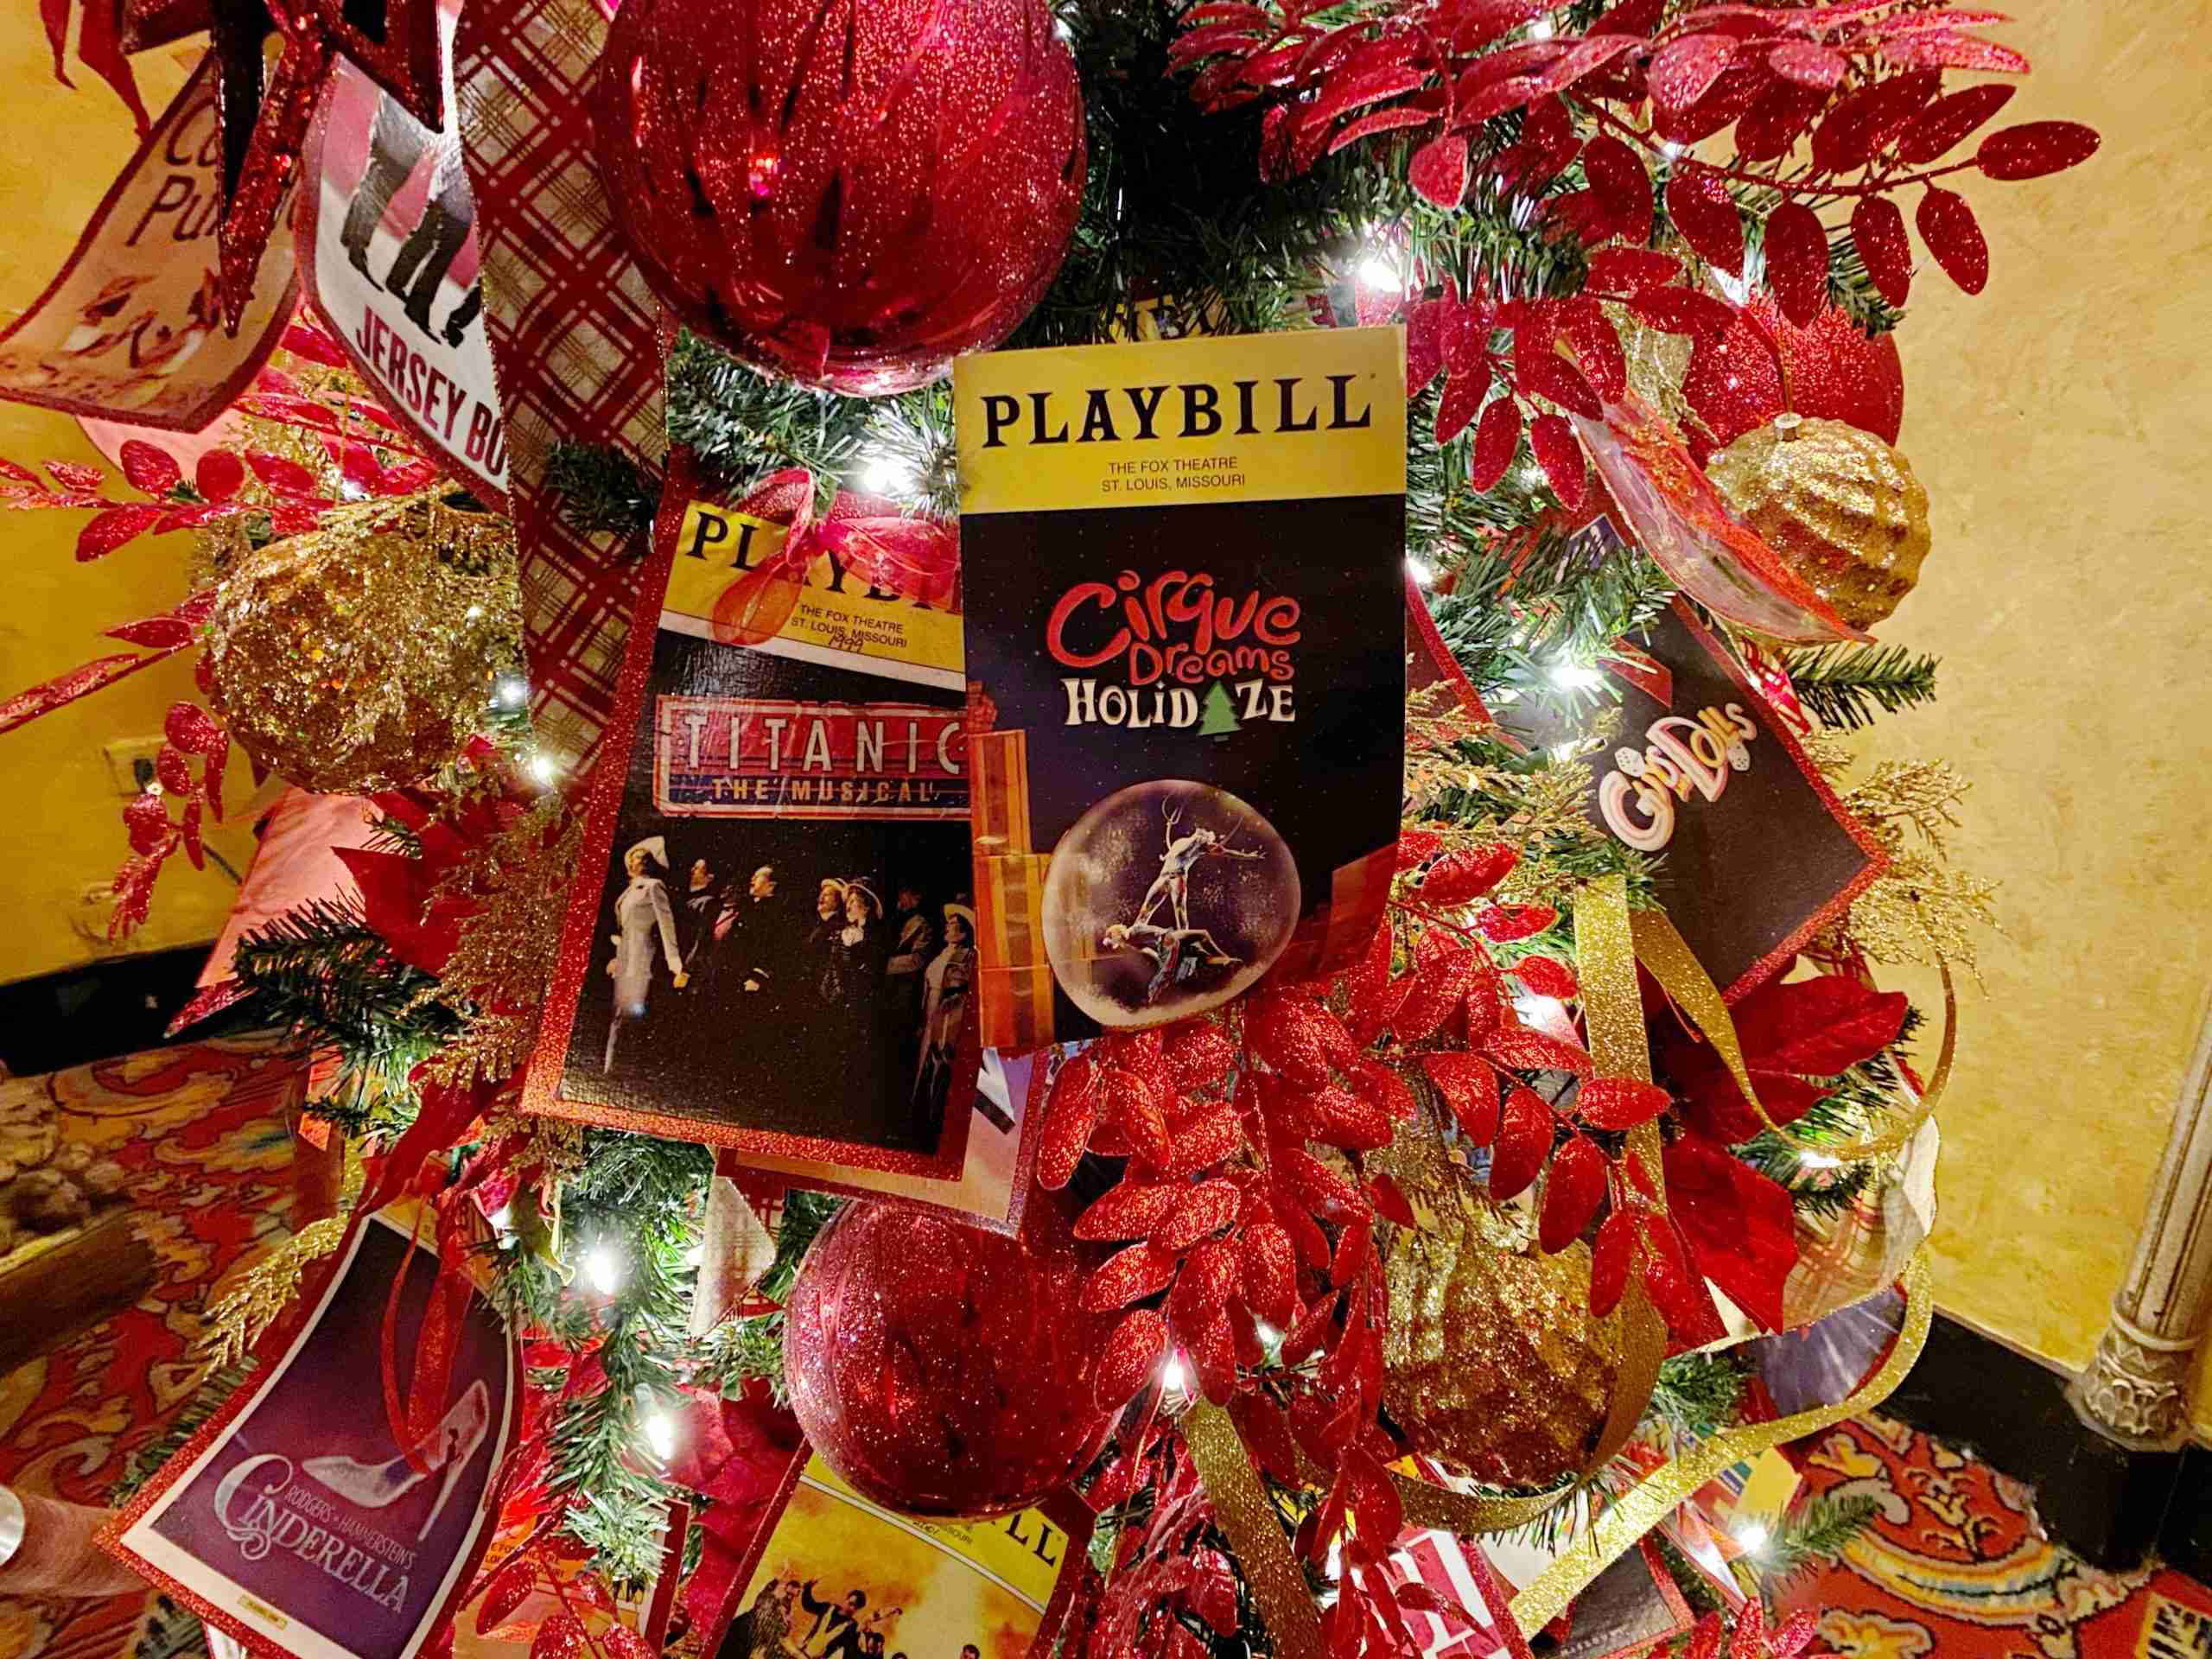 Playbill tree at Fabulous Fox Theatre in St. Louis with Cirque Dreams Holidaze.